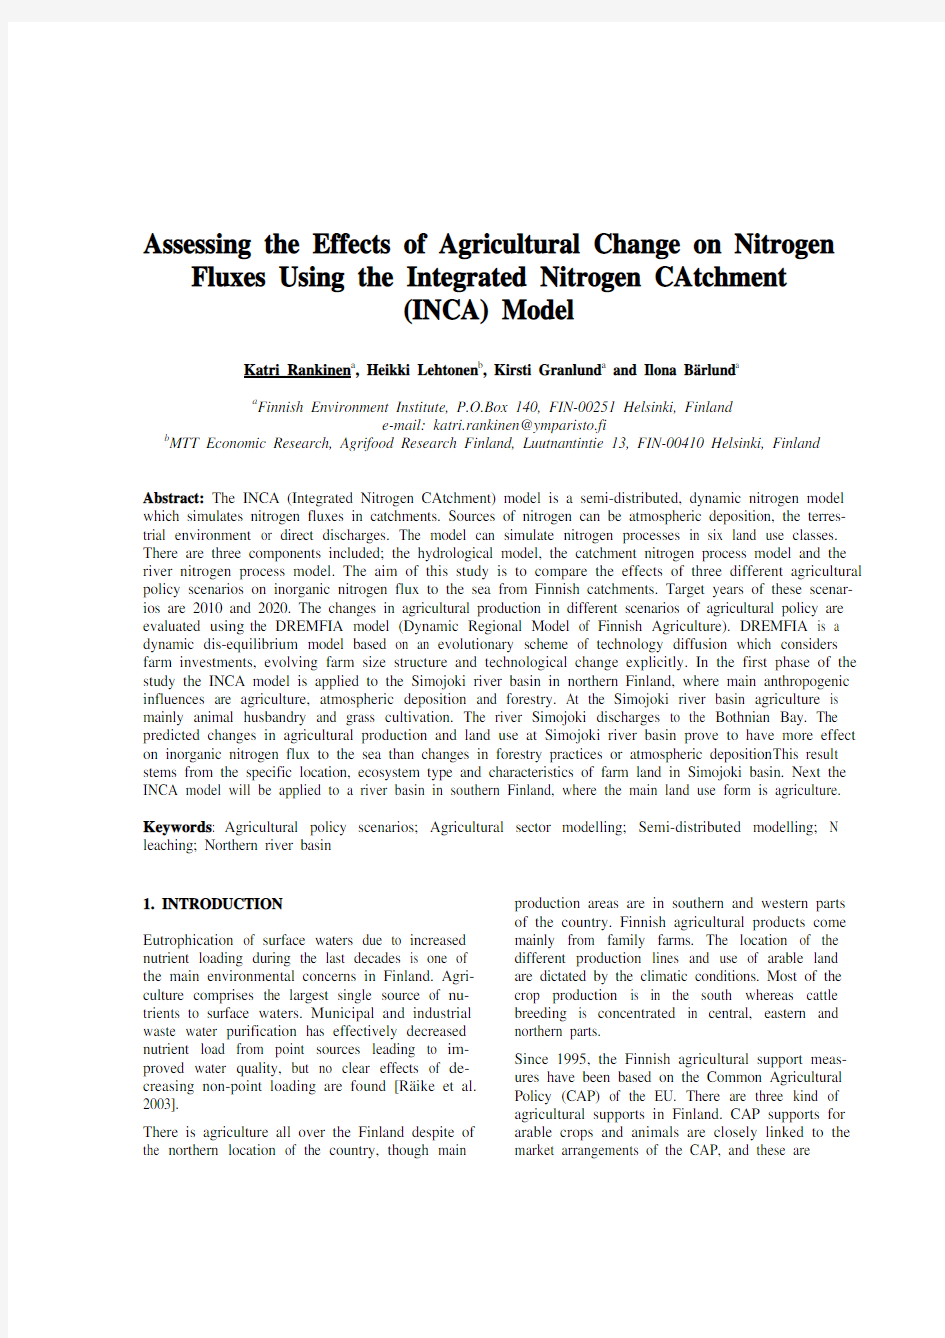 Assessing the Effects of Agricultural Change on Nitrogen Fluxes Using the Integrated Nitrog